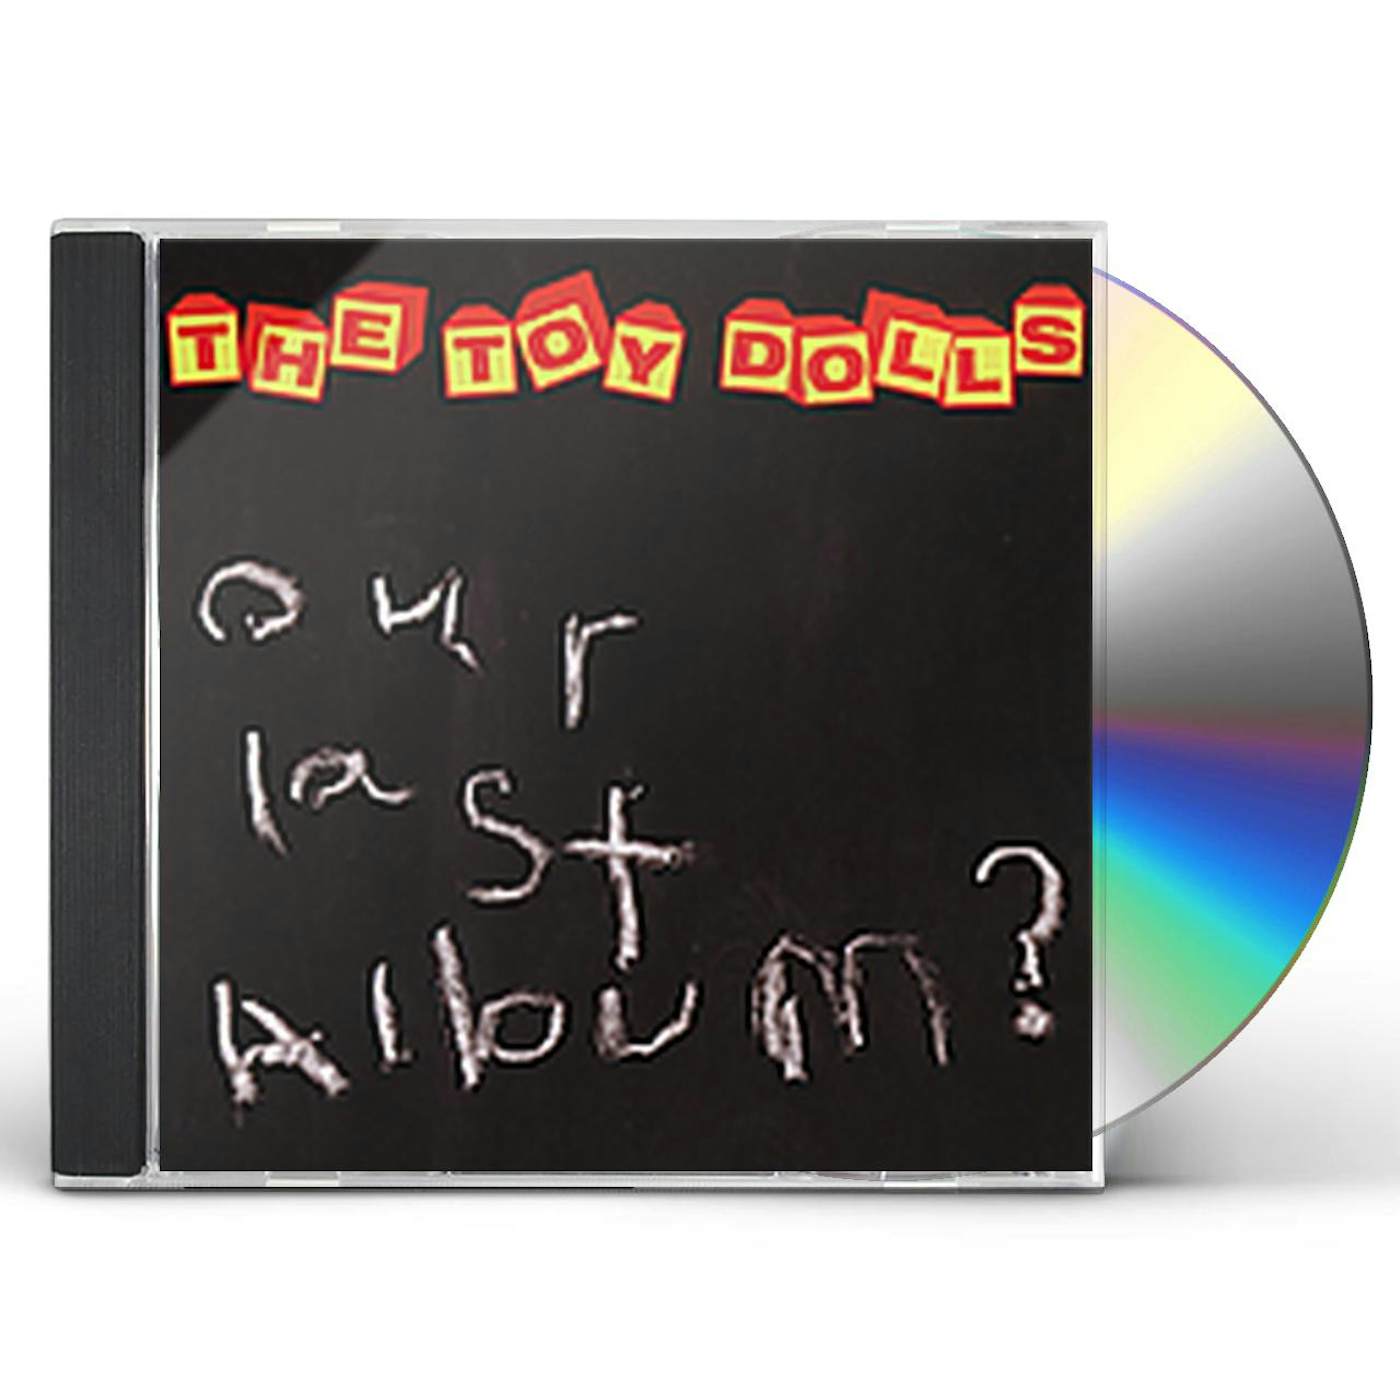 The Toy Dolls OUR LAST ALBUM CD